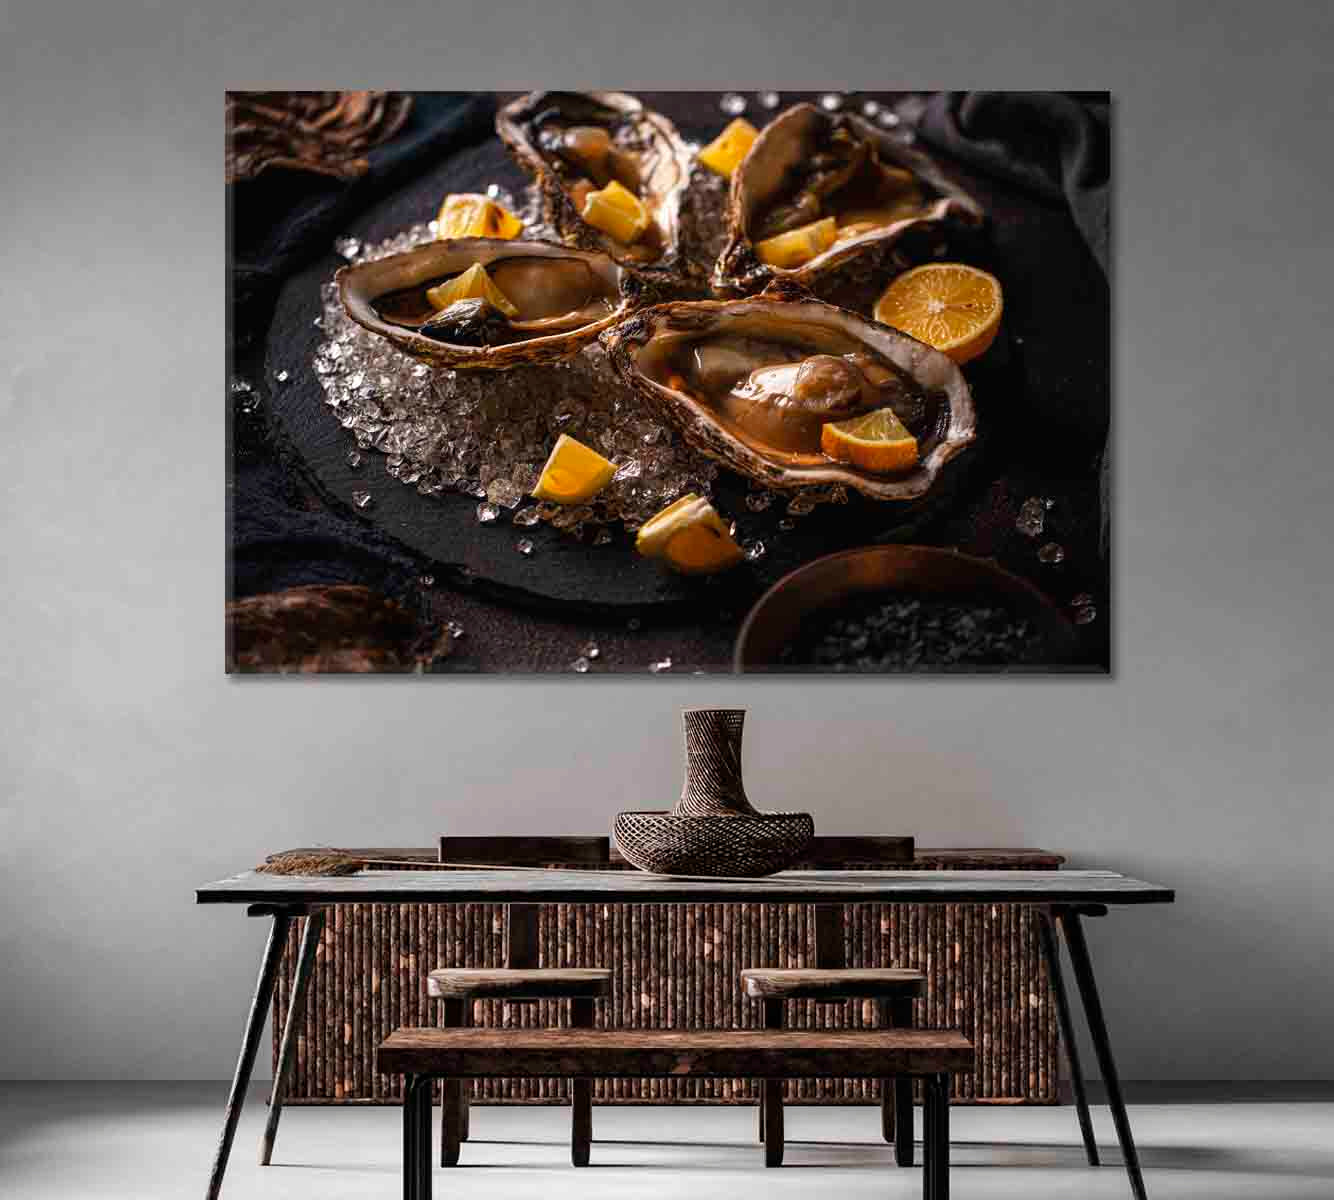 Oysters with Ice and Lemon Canvas Print-Canvas Print-CetArt-1 Panel-24x16 inches-CetArt